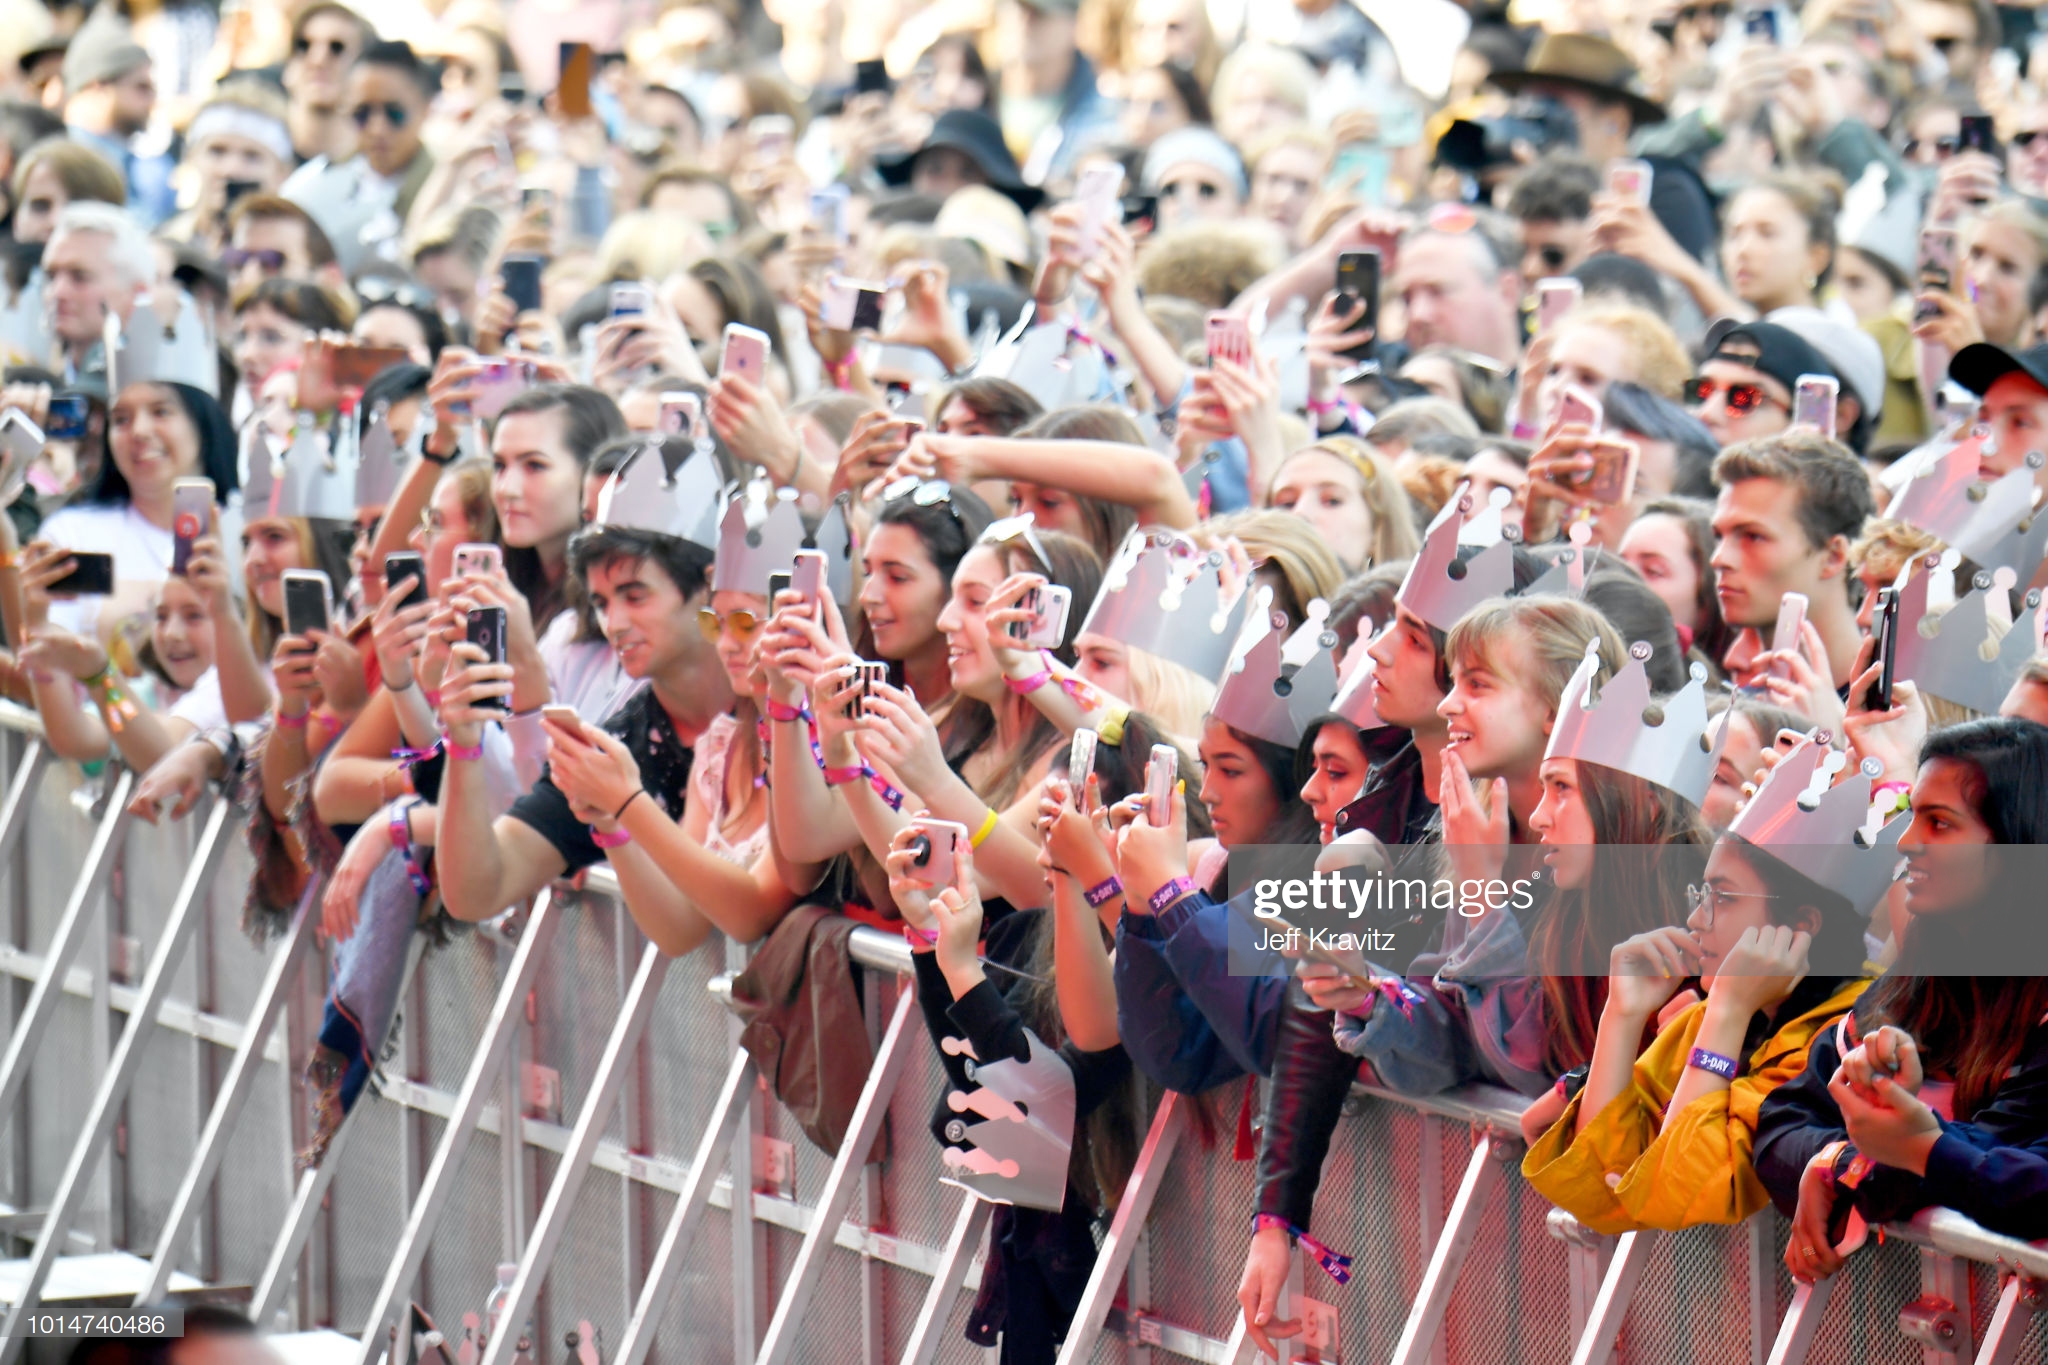 gettyimages-1014740486-2048x2048.jpg